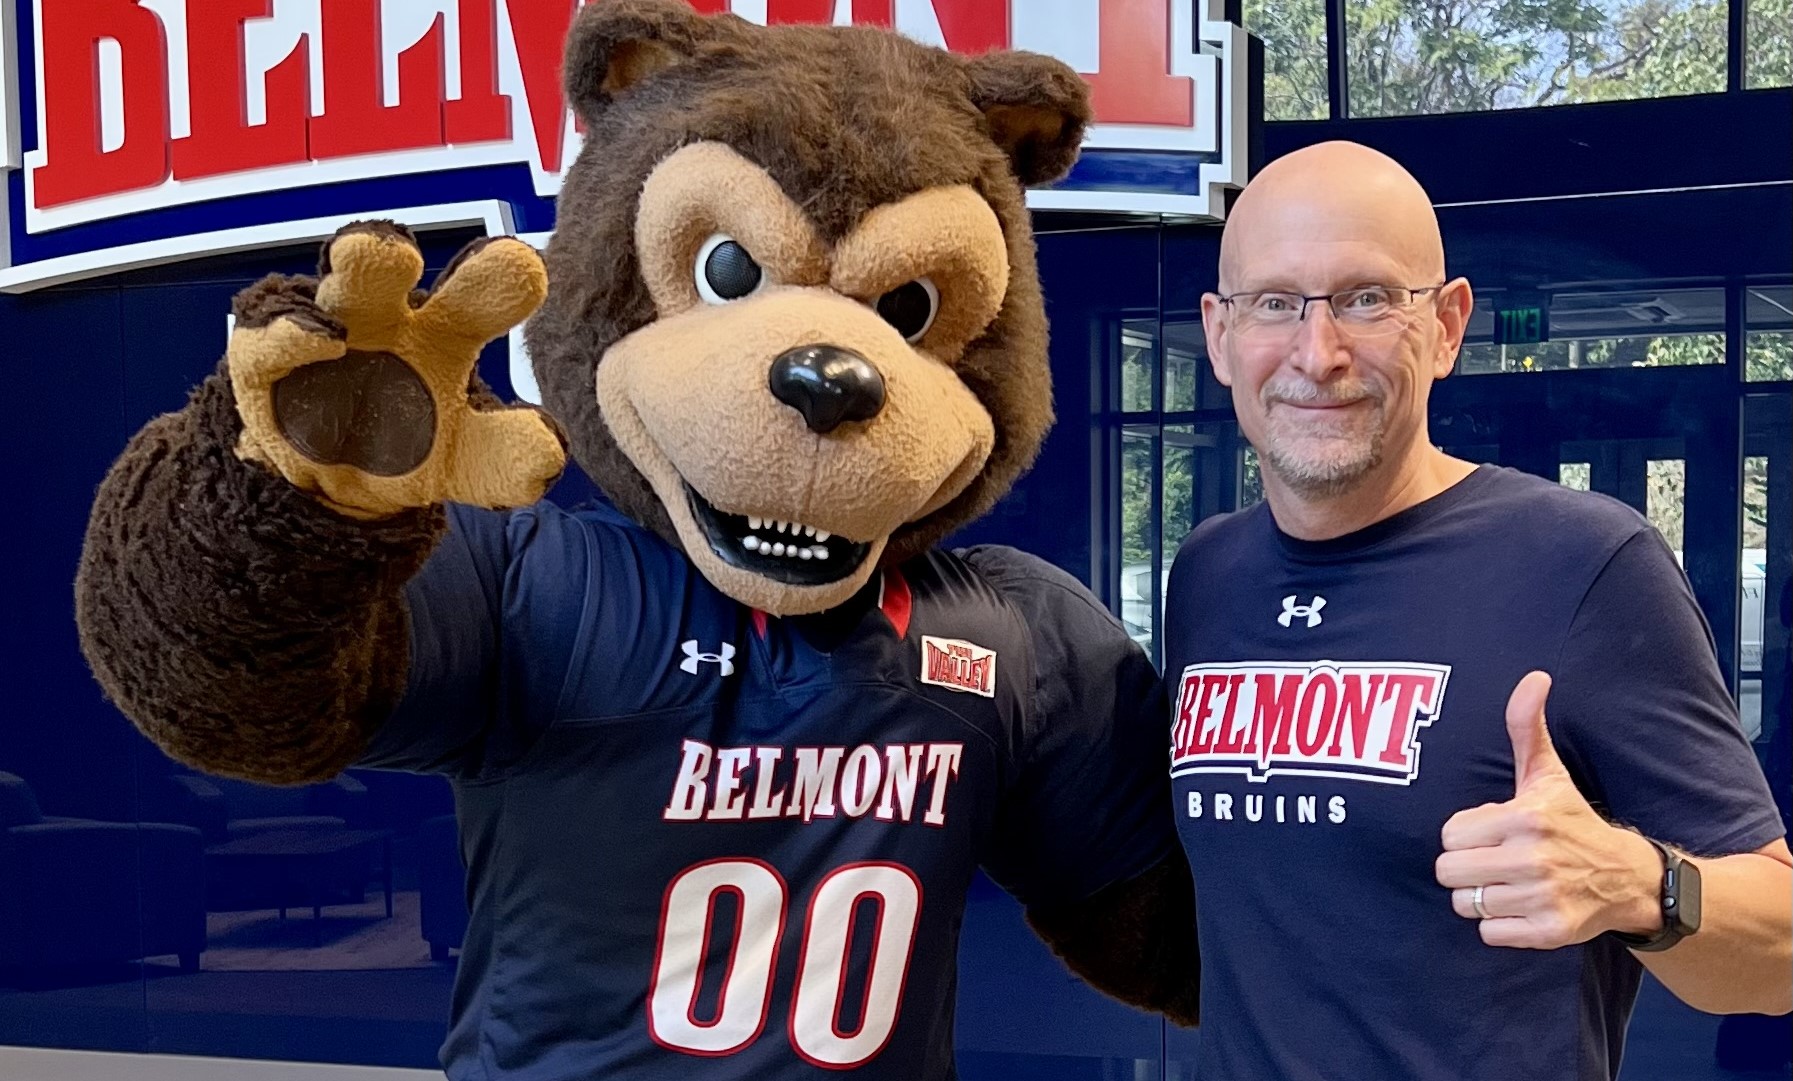 John Browning, Pro-Care President, poses with Bruiser, the Belmont mascotl